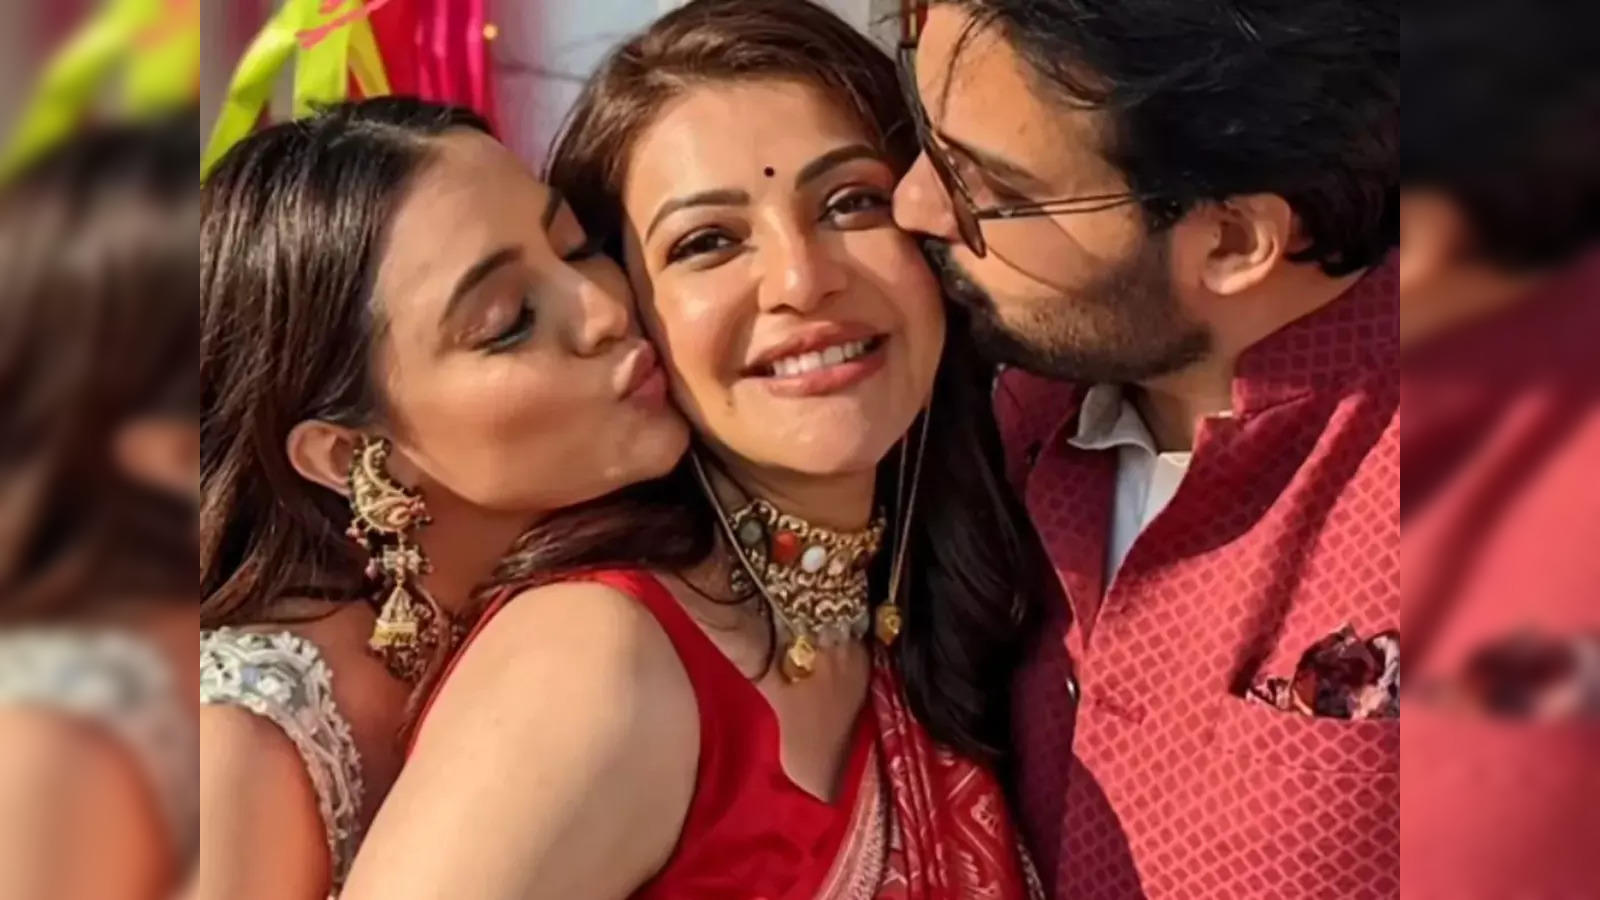 Kajal Agarwal Sex Videos - Mommy to-be Kajal Aggarwal all set to welcome her little one, shares  glimpse from baby shower - The Economic Times